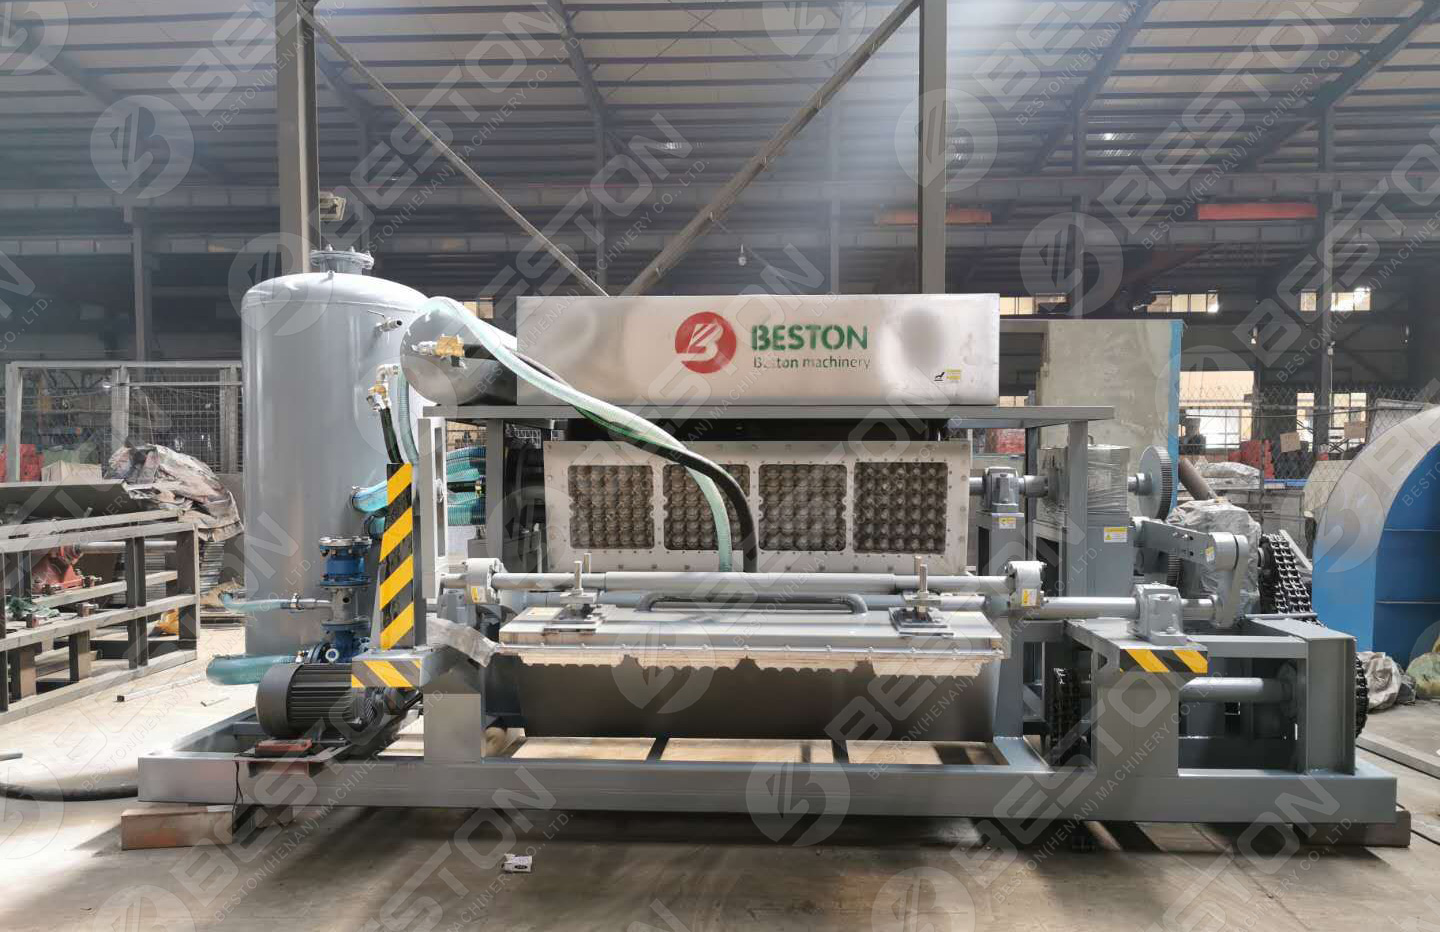 Beston Egg Tray Machine for Sale in India